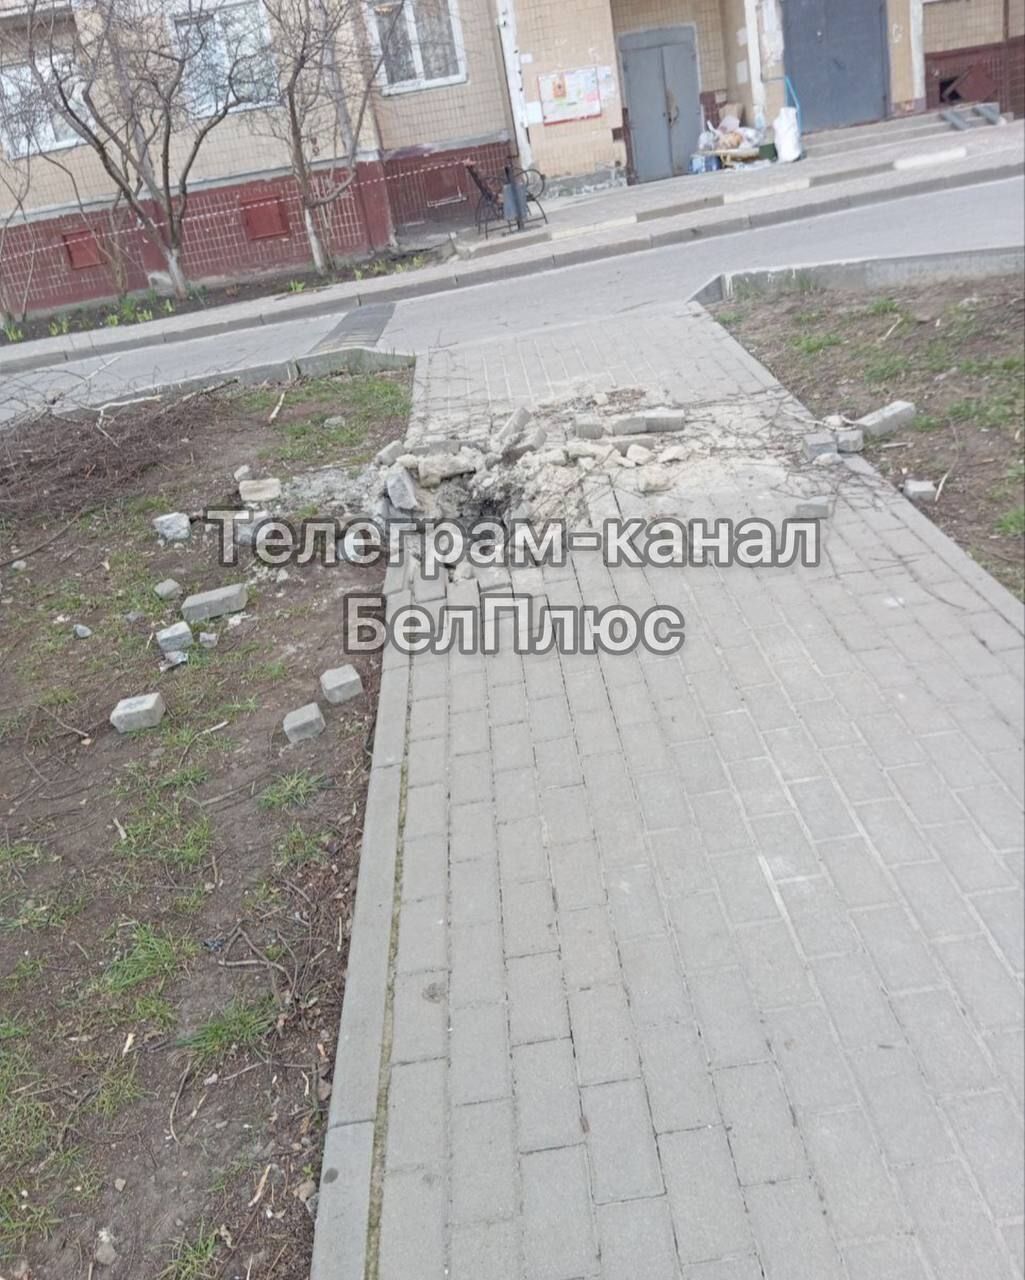 After the fighting in Ukraine, explosions occurred in the Russian city of Belgorod. Photos and video